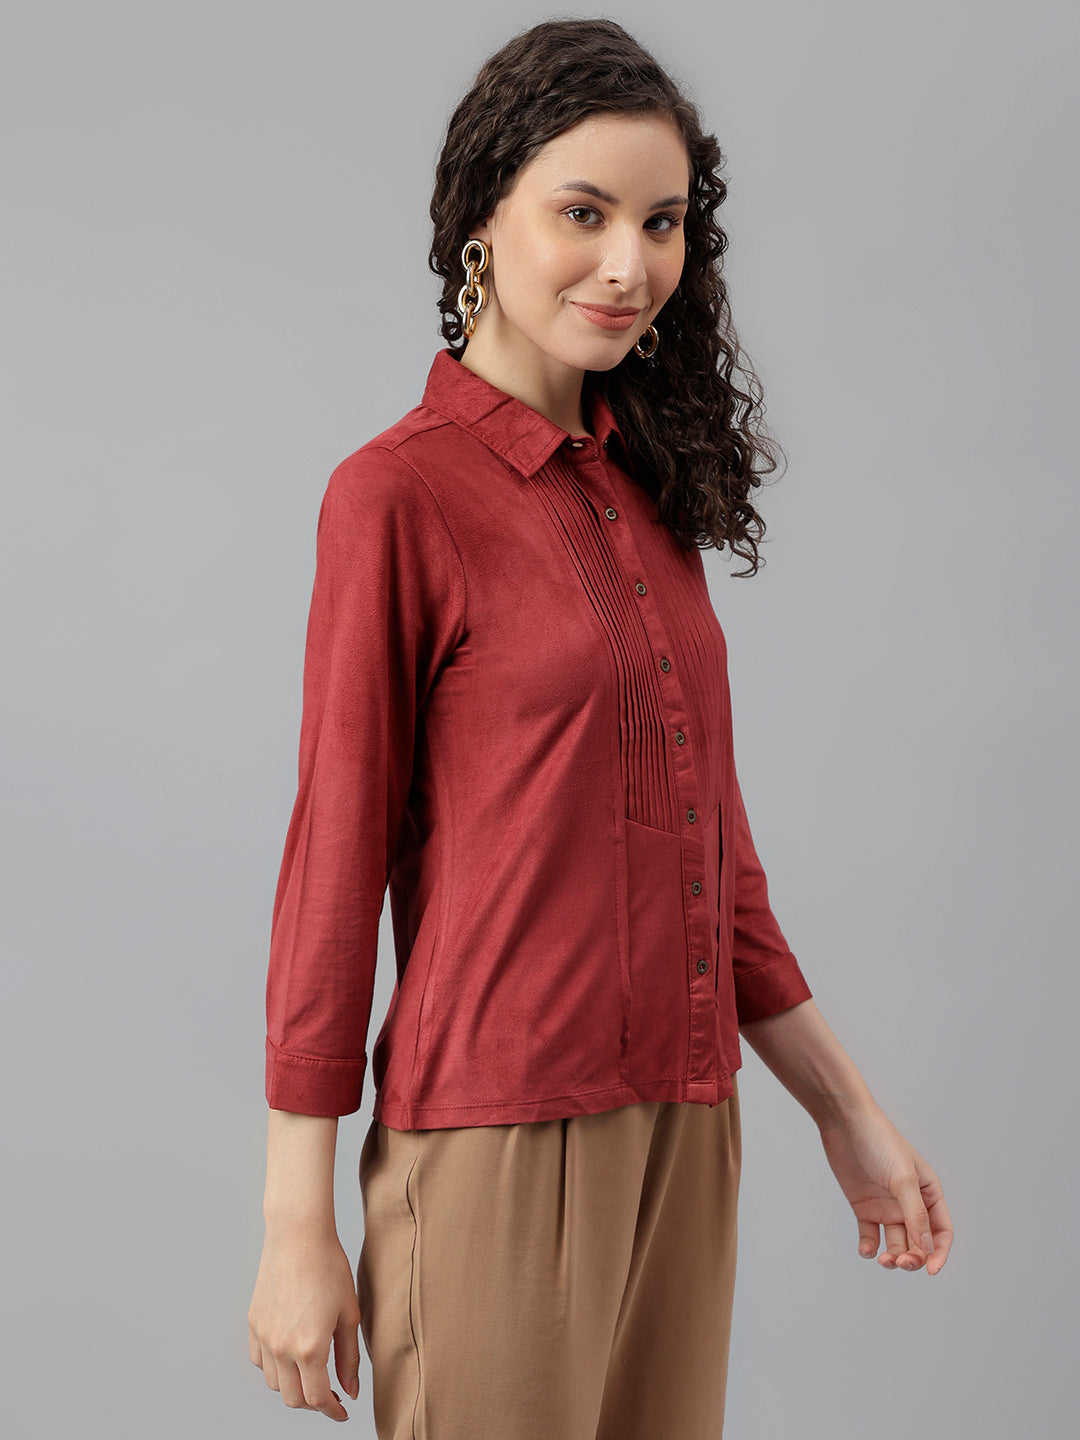 Maroon Full Sleeve Solid Shirt Blouse Top